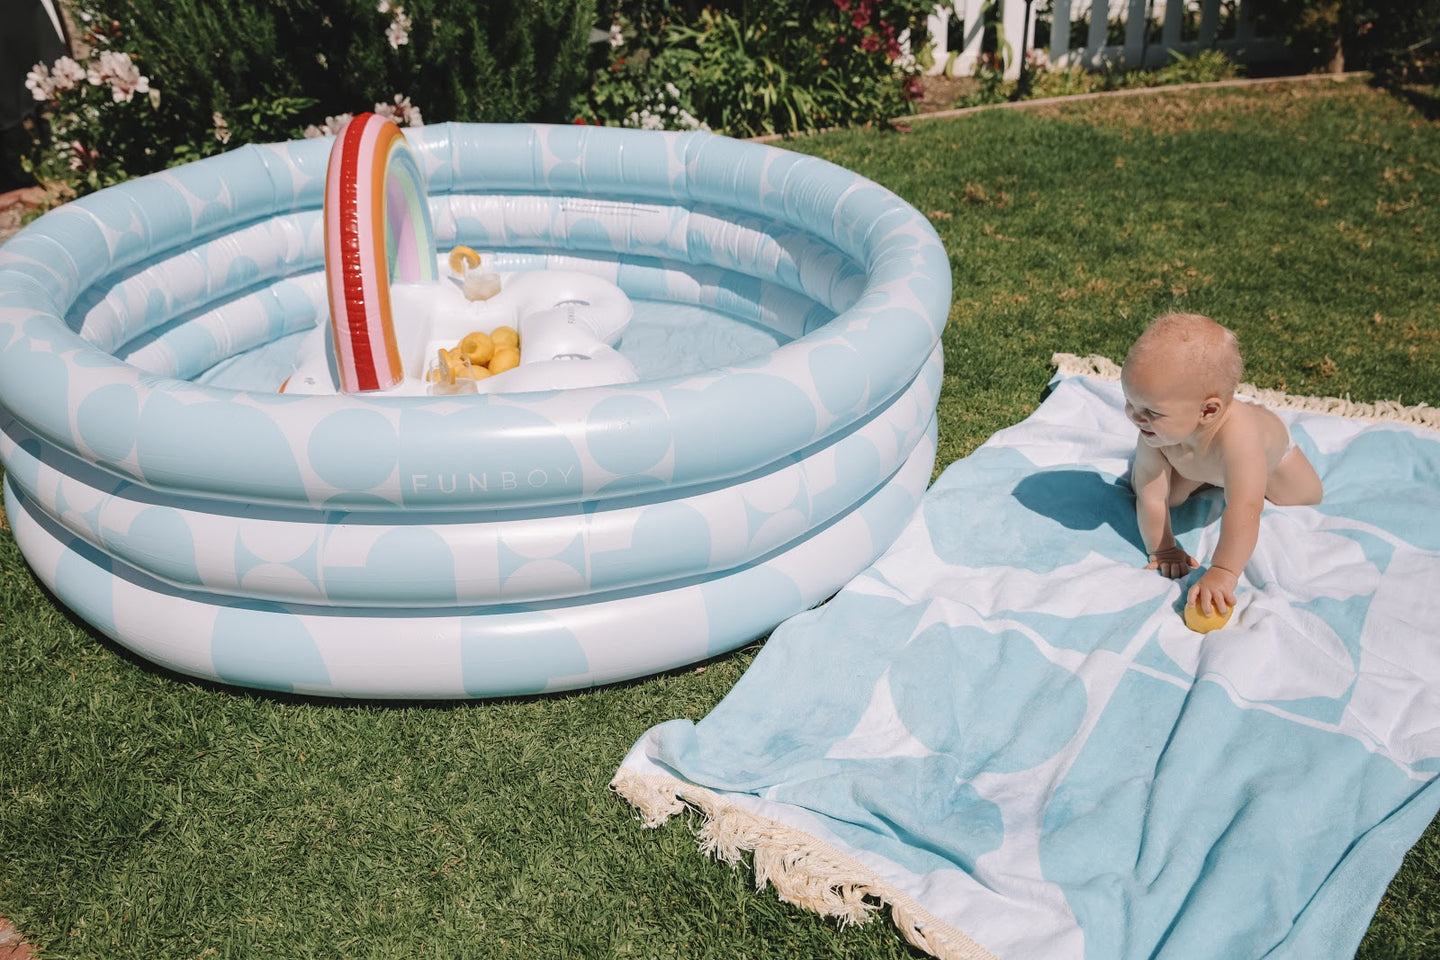 How To Patch An Inflatable Pool